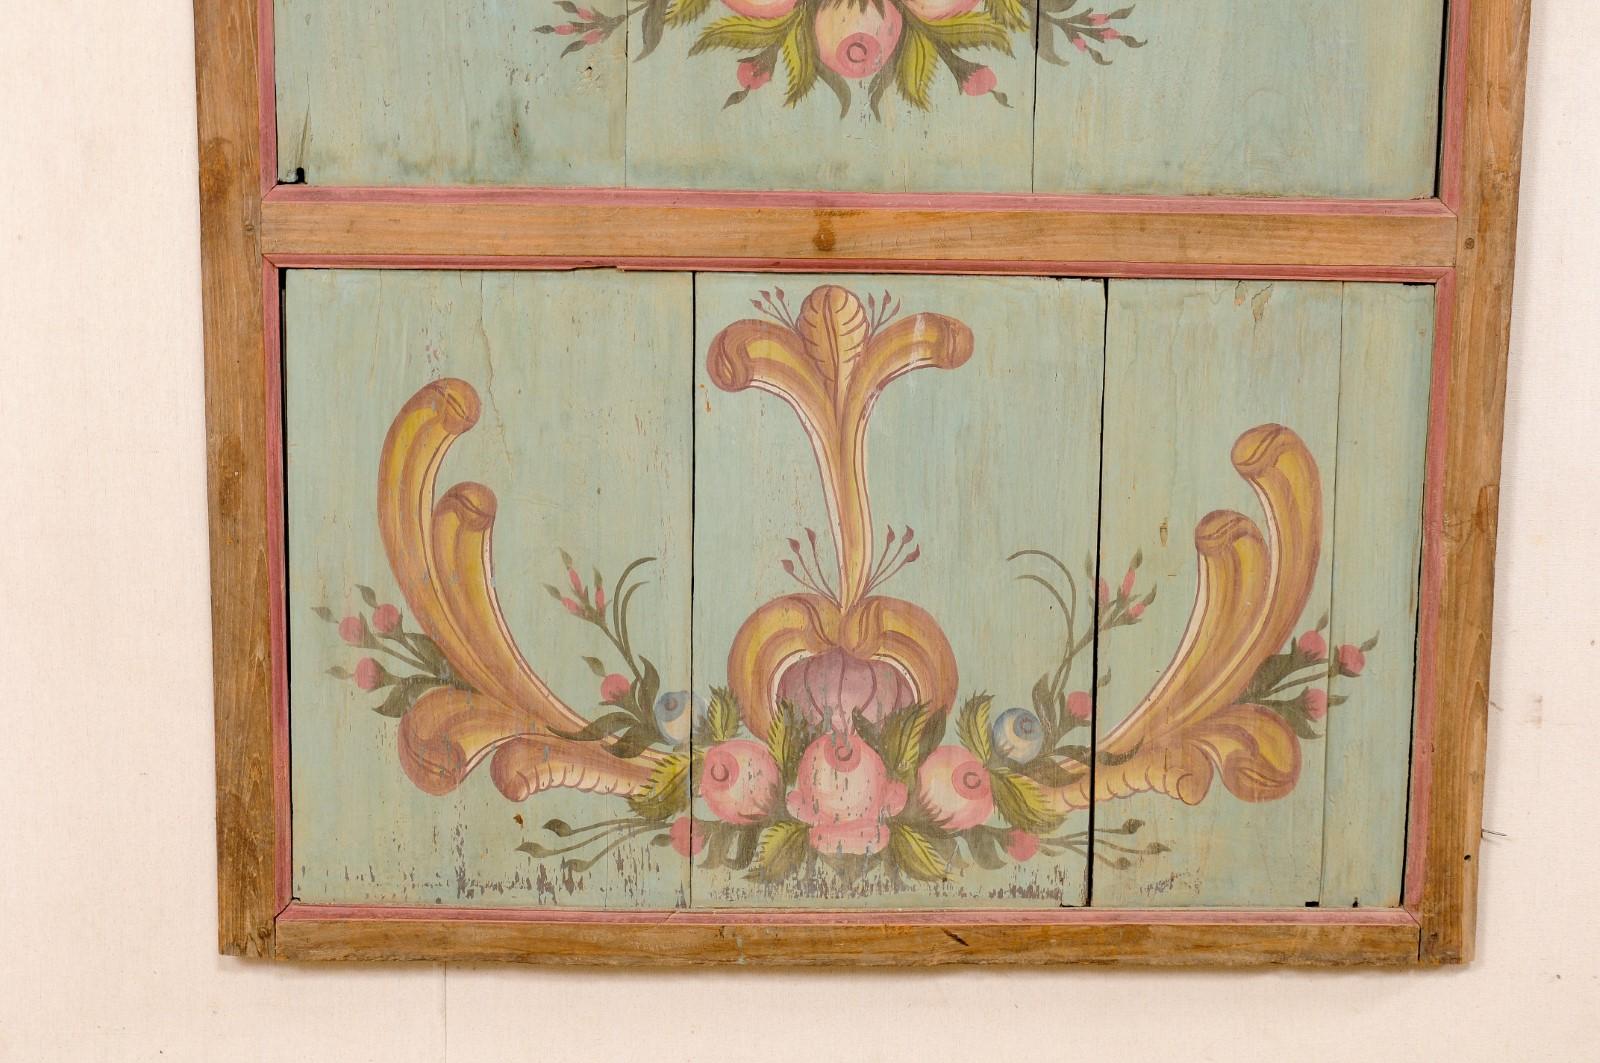 19th C. Hand-Painted Wooden Wall Panel in Floral Motif In Good Condition For Sale In Atlanta, GA